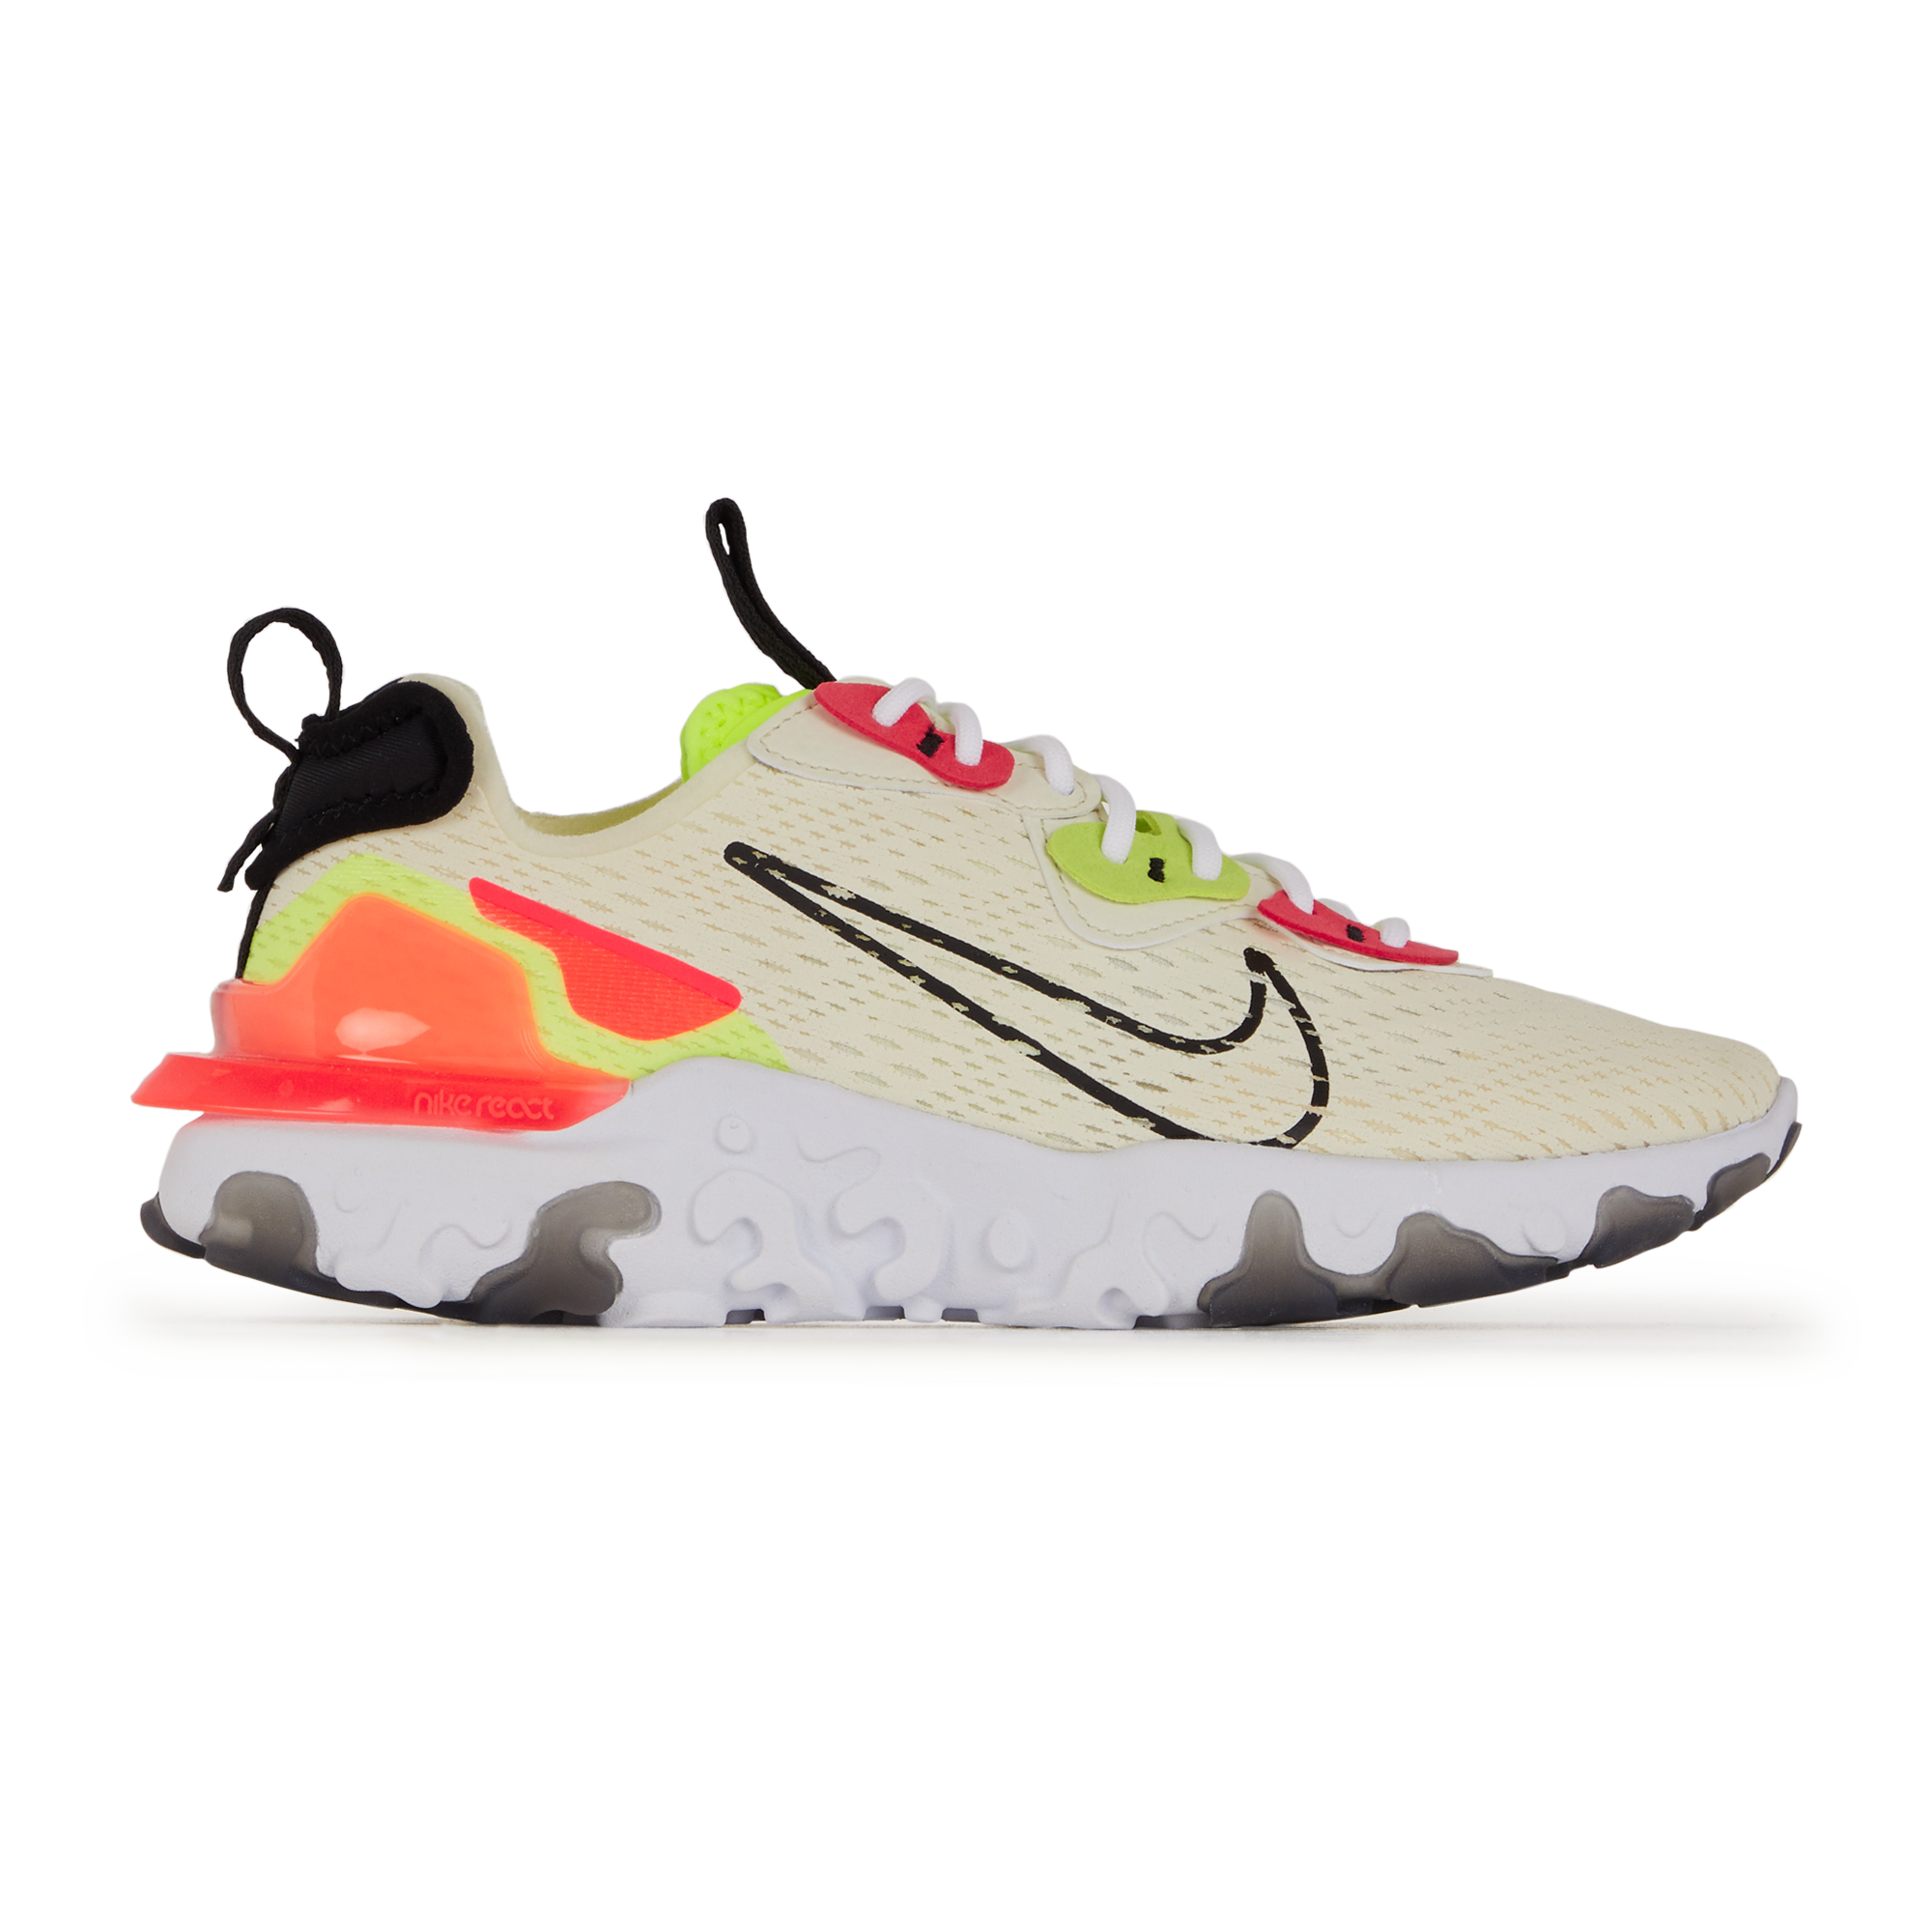 Anual cabina huevo nike react element 55 homme courir, heavy deal 89% off -  stpcommercialcleaners.com